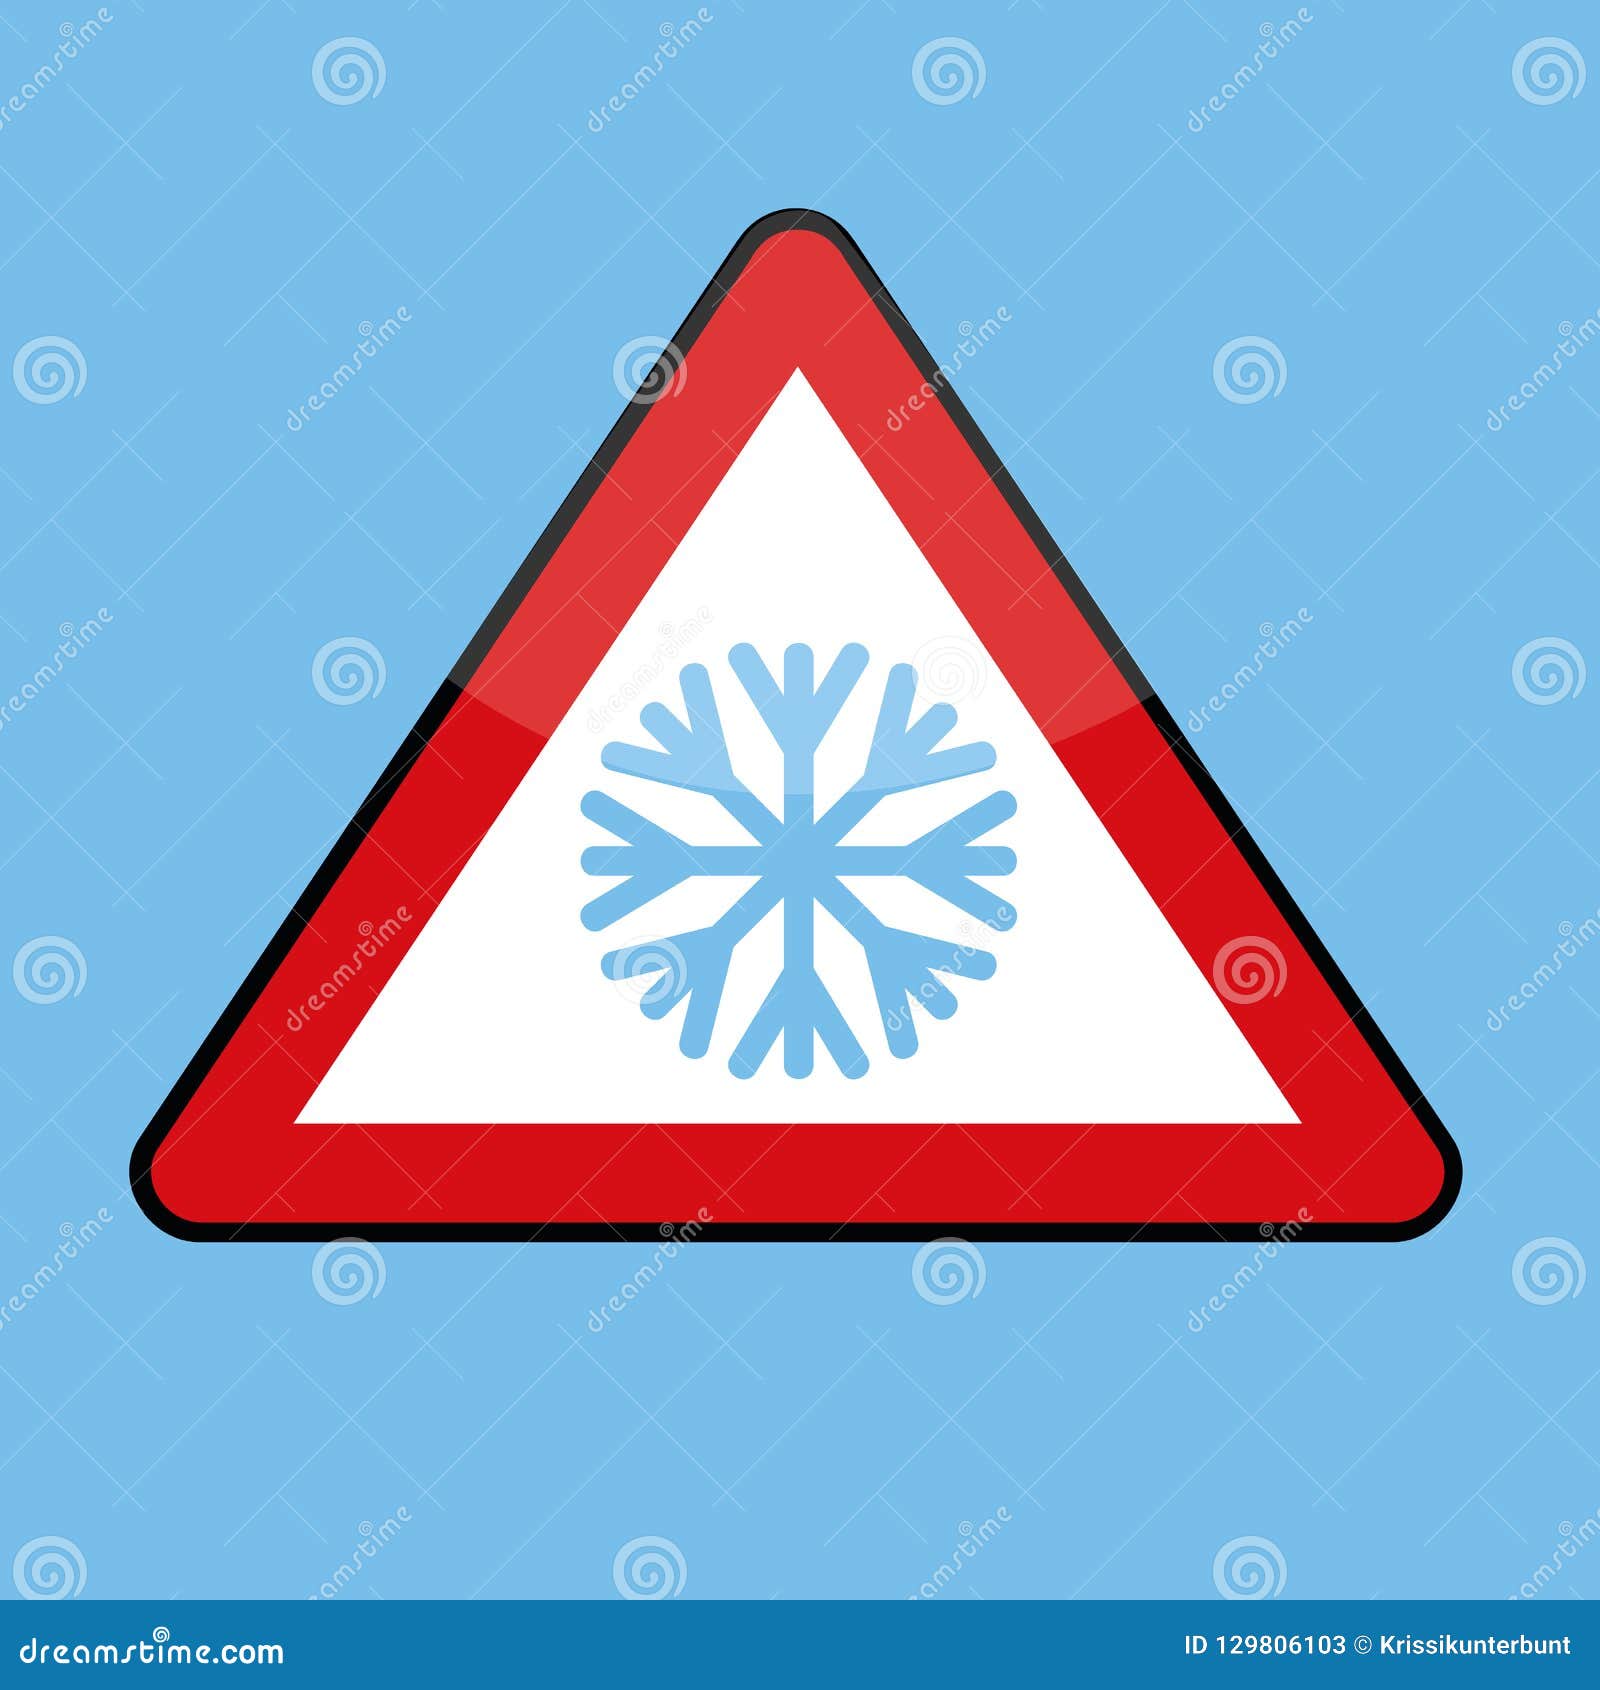 triangle road sign with snowflake for cold winter